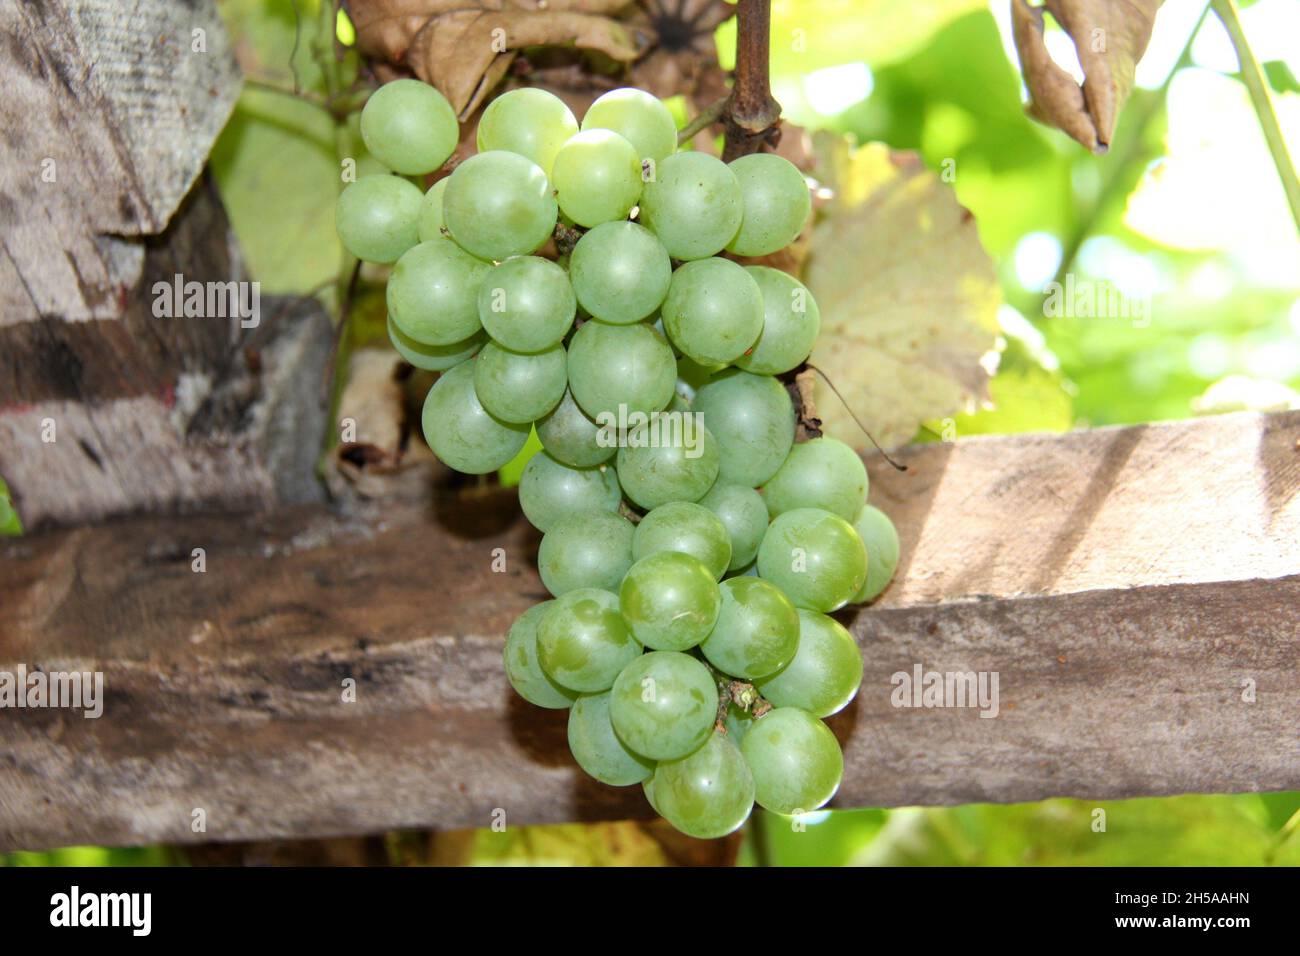 Bunch of ripe green grapes on a vine, plant of the Vitaceae family. Stock Photo